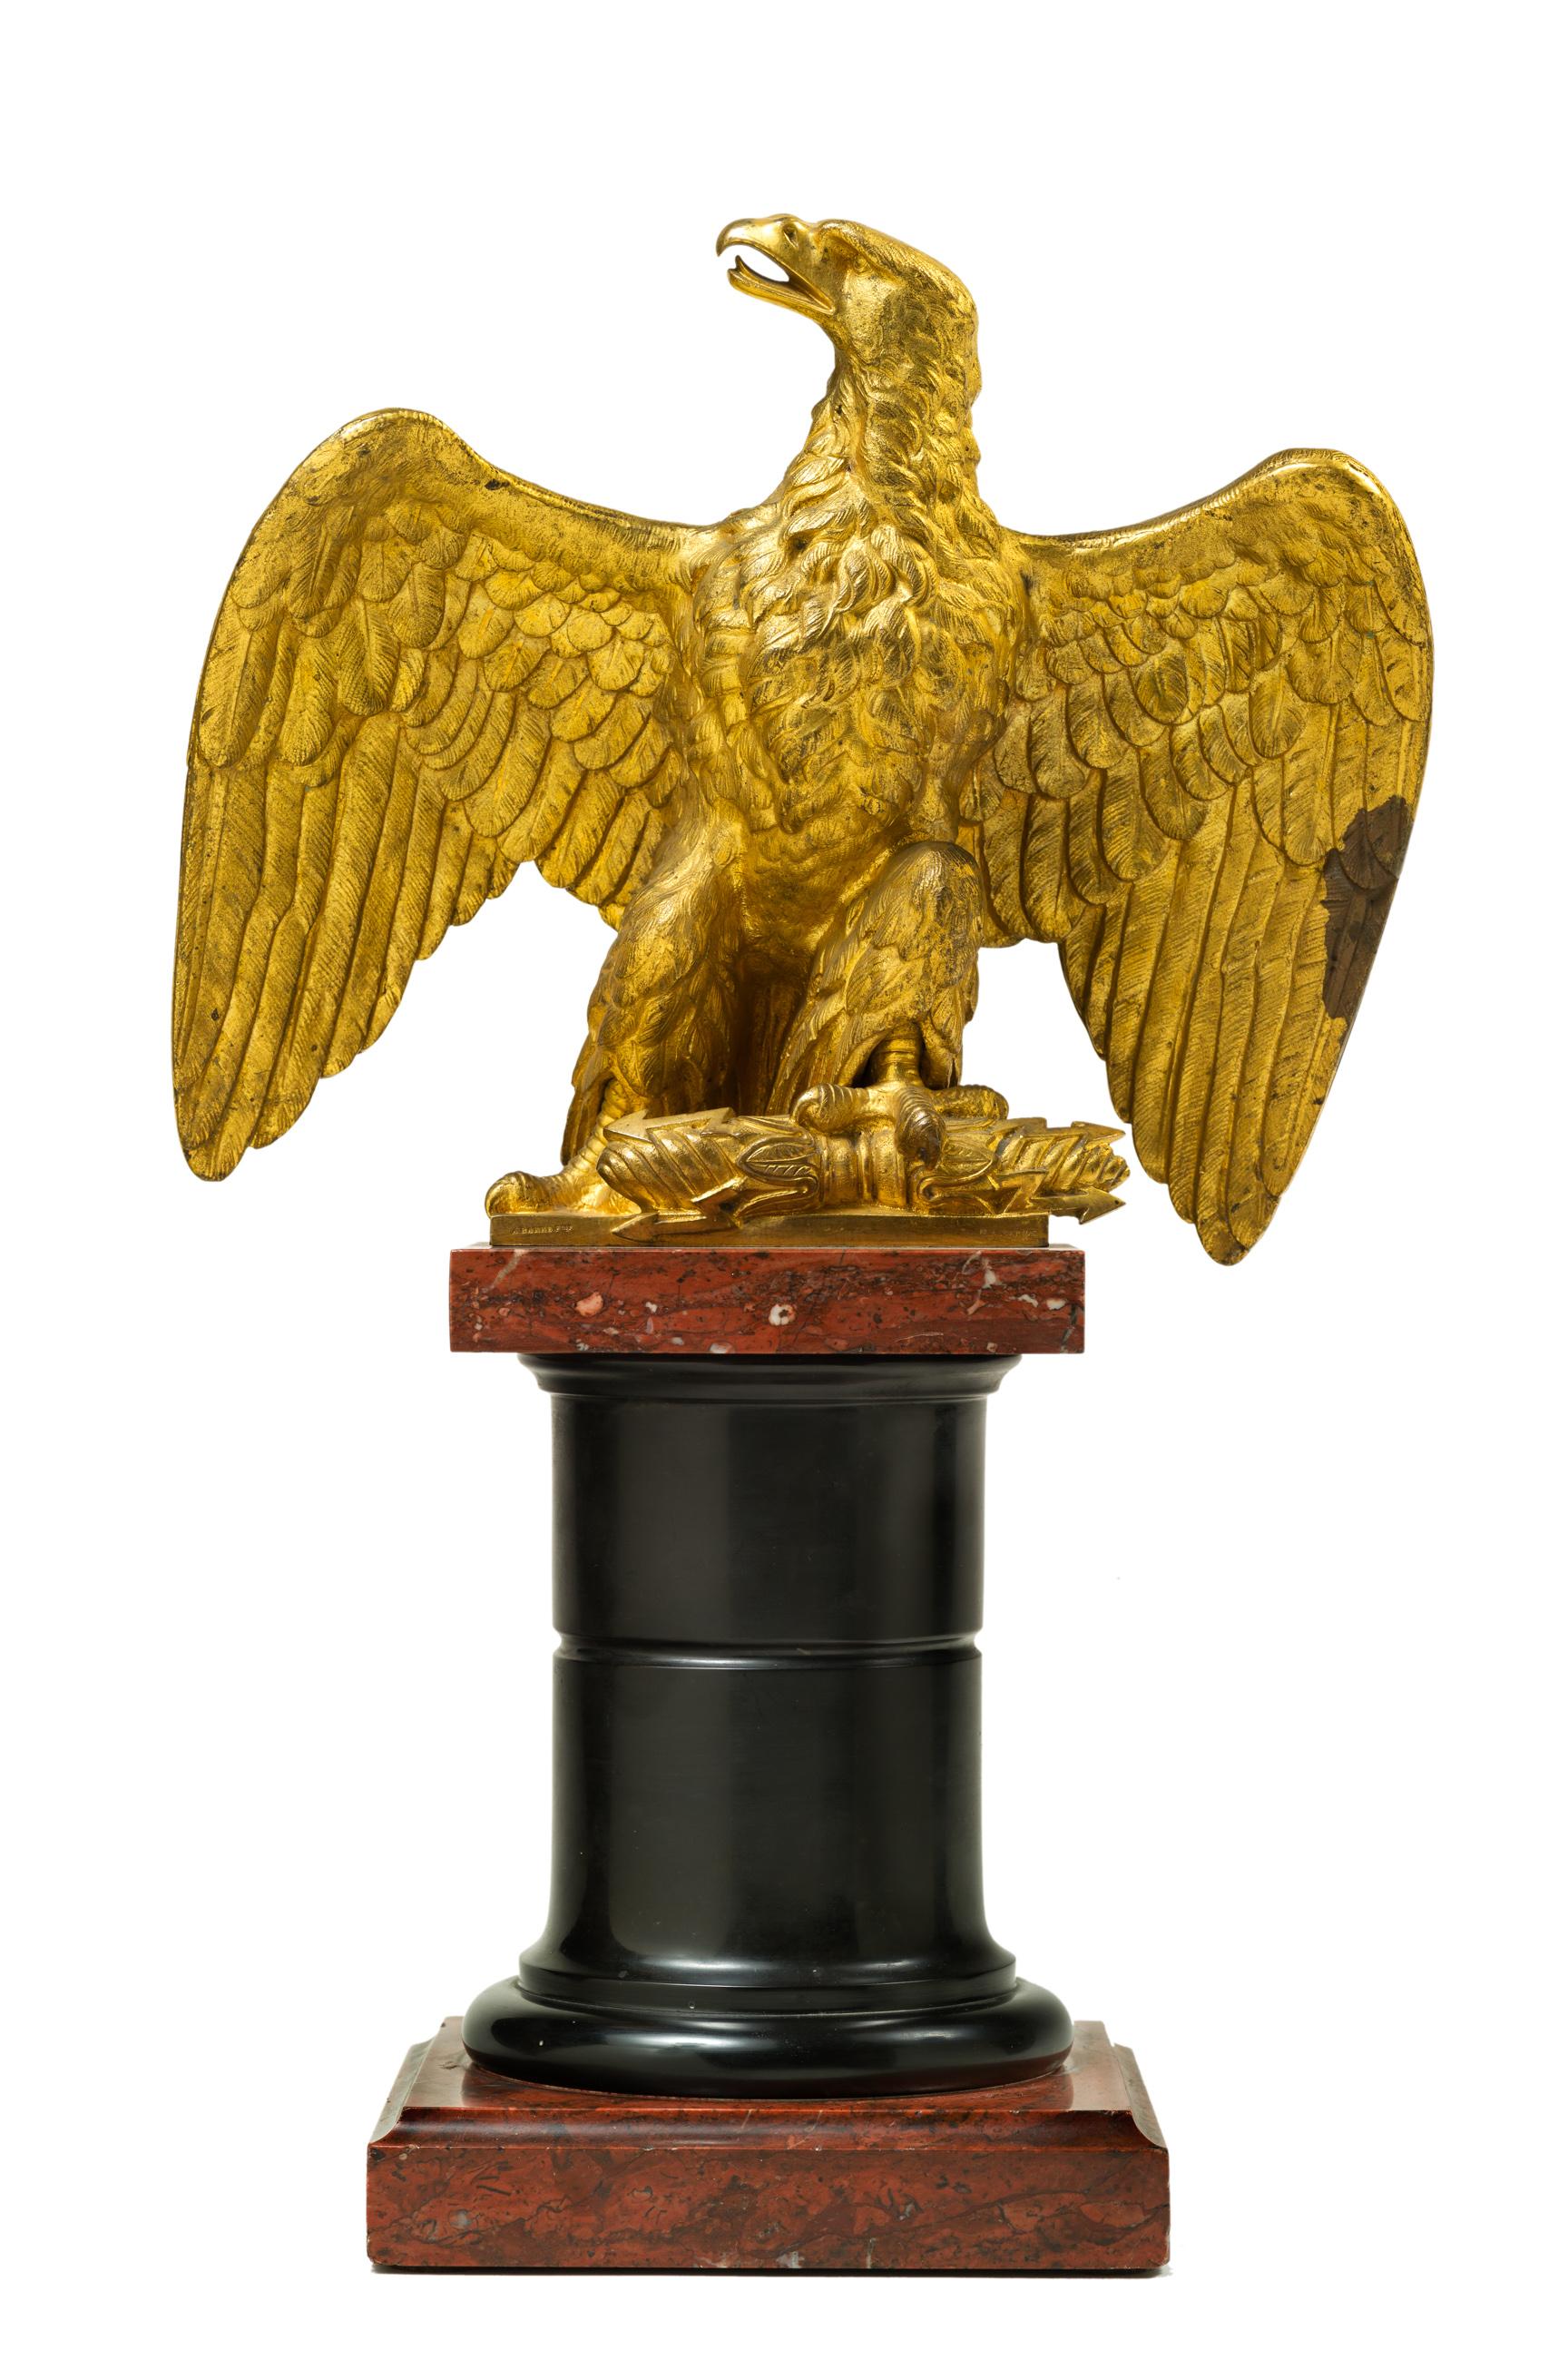 Jean-Auguste Barre, 
1811-1896, French

Eagle of the French National Guard, 1852
Marion Foundry- Barre sculptor

This Eagle was at the Hotel de Ville in Paris and escaped the flames of the fire of 1871, during the Commune.
It still bears on